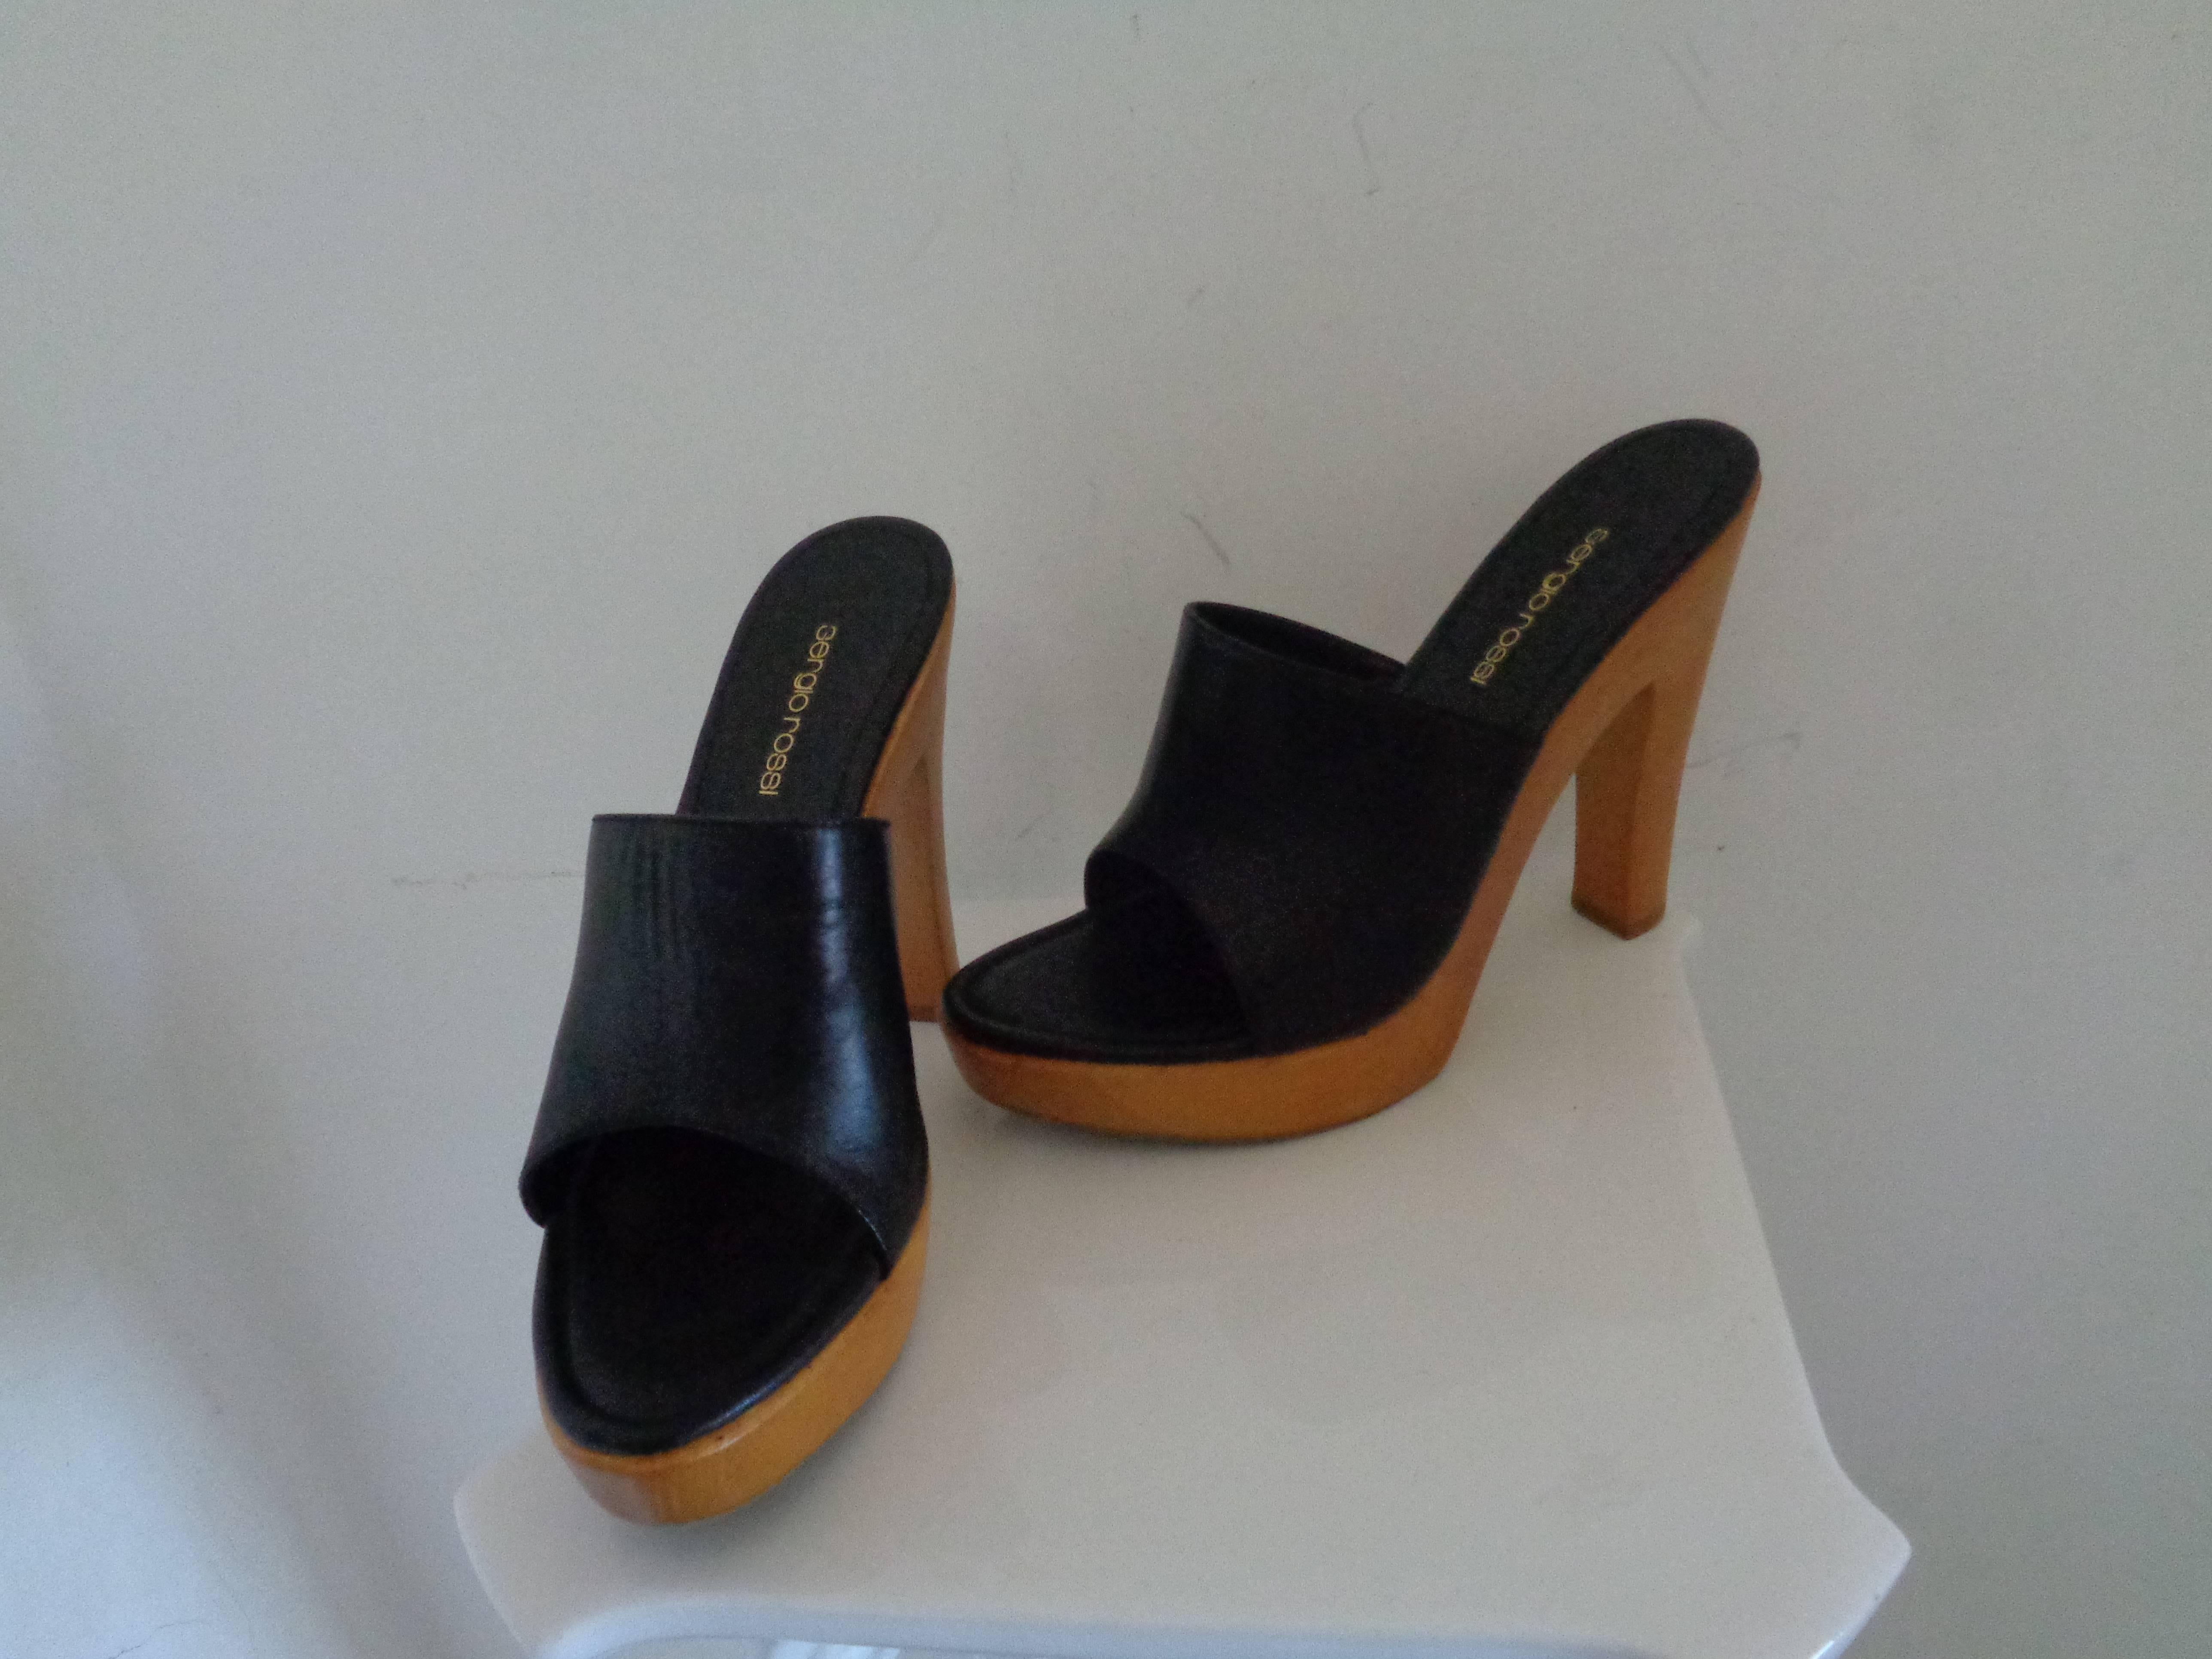 Sergio Rossi Black Clog

totally made in italy in size 39
unworn
heel 14 cm